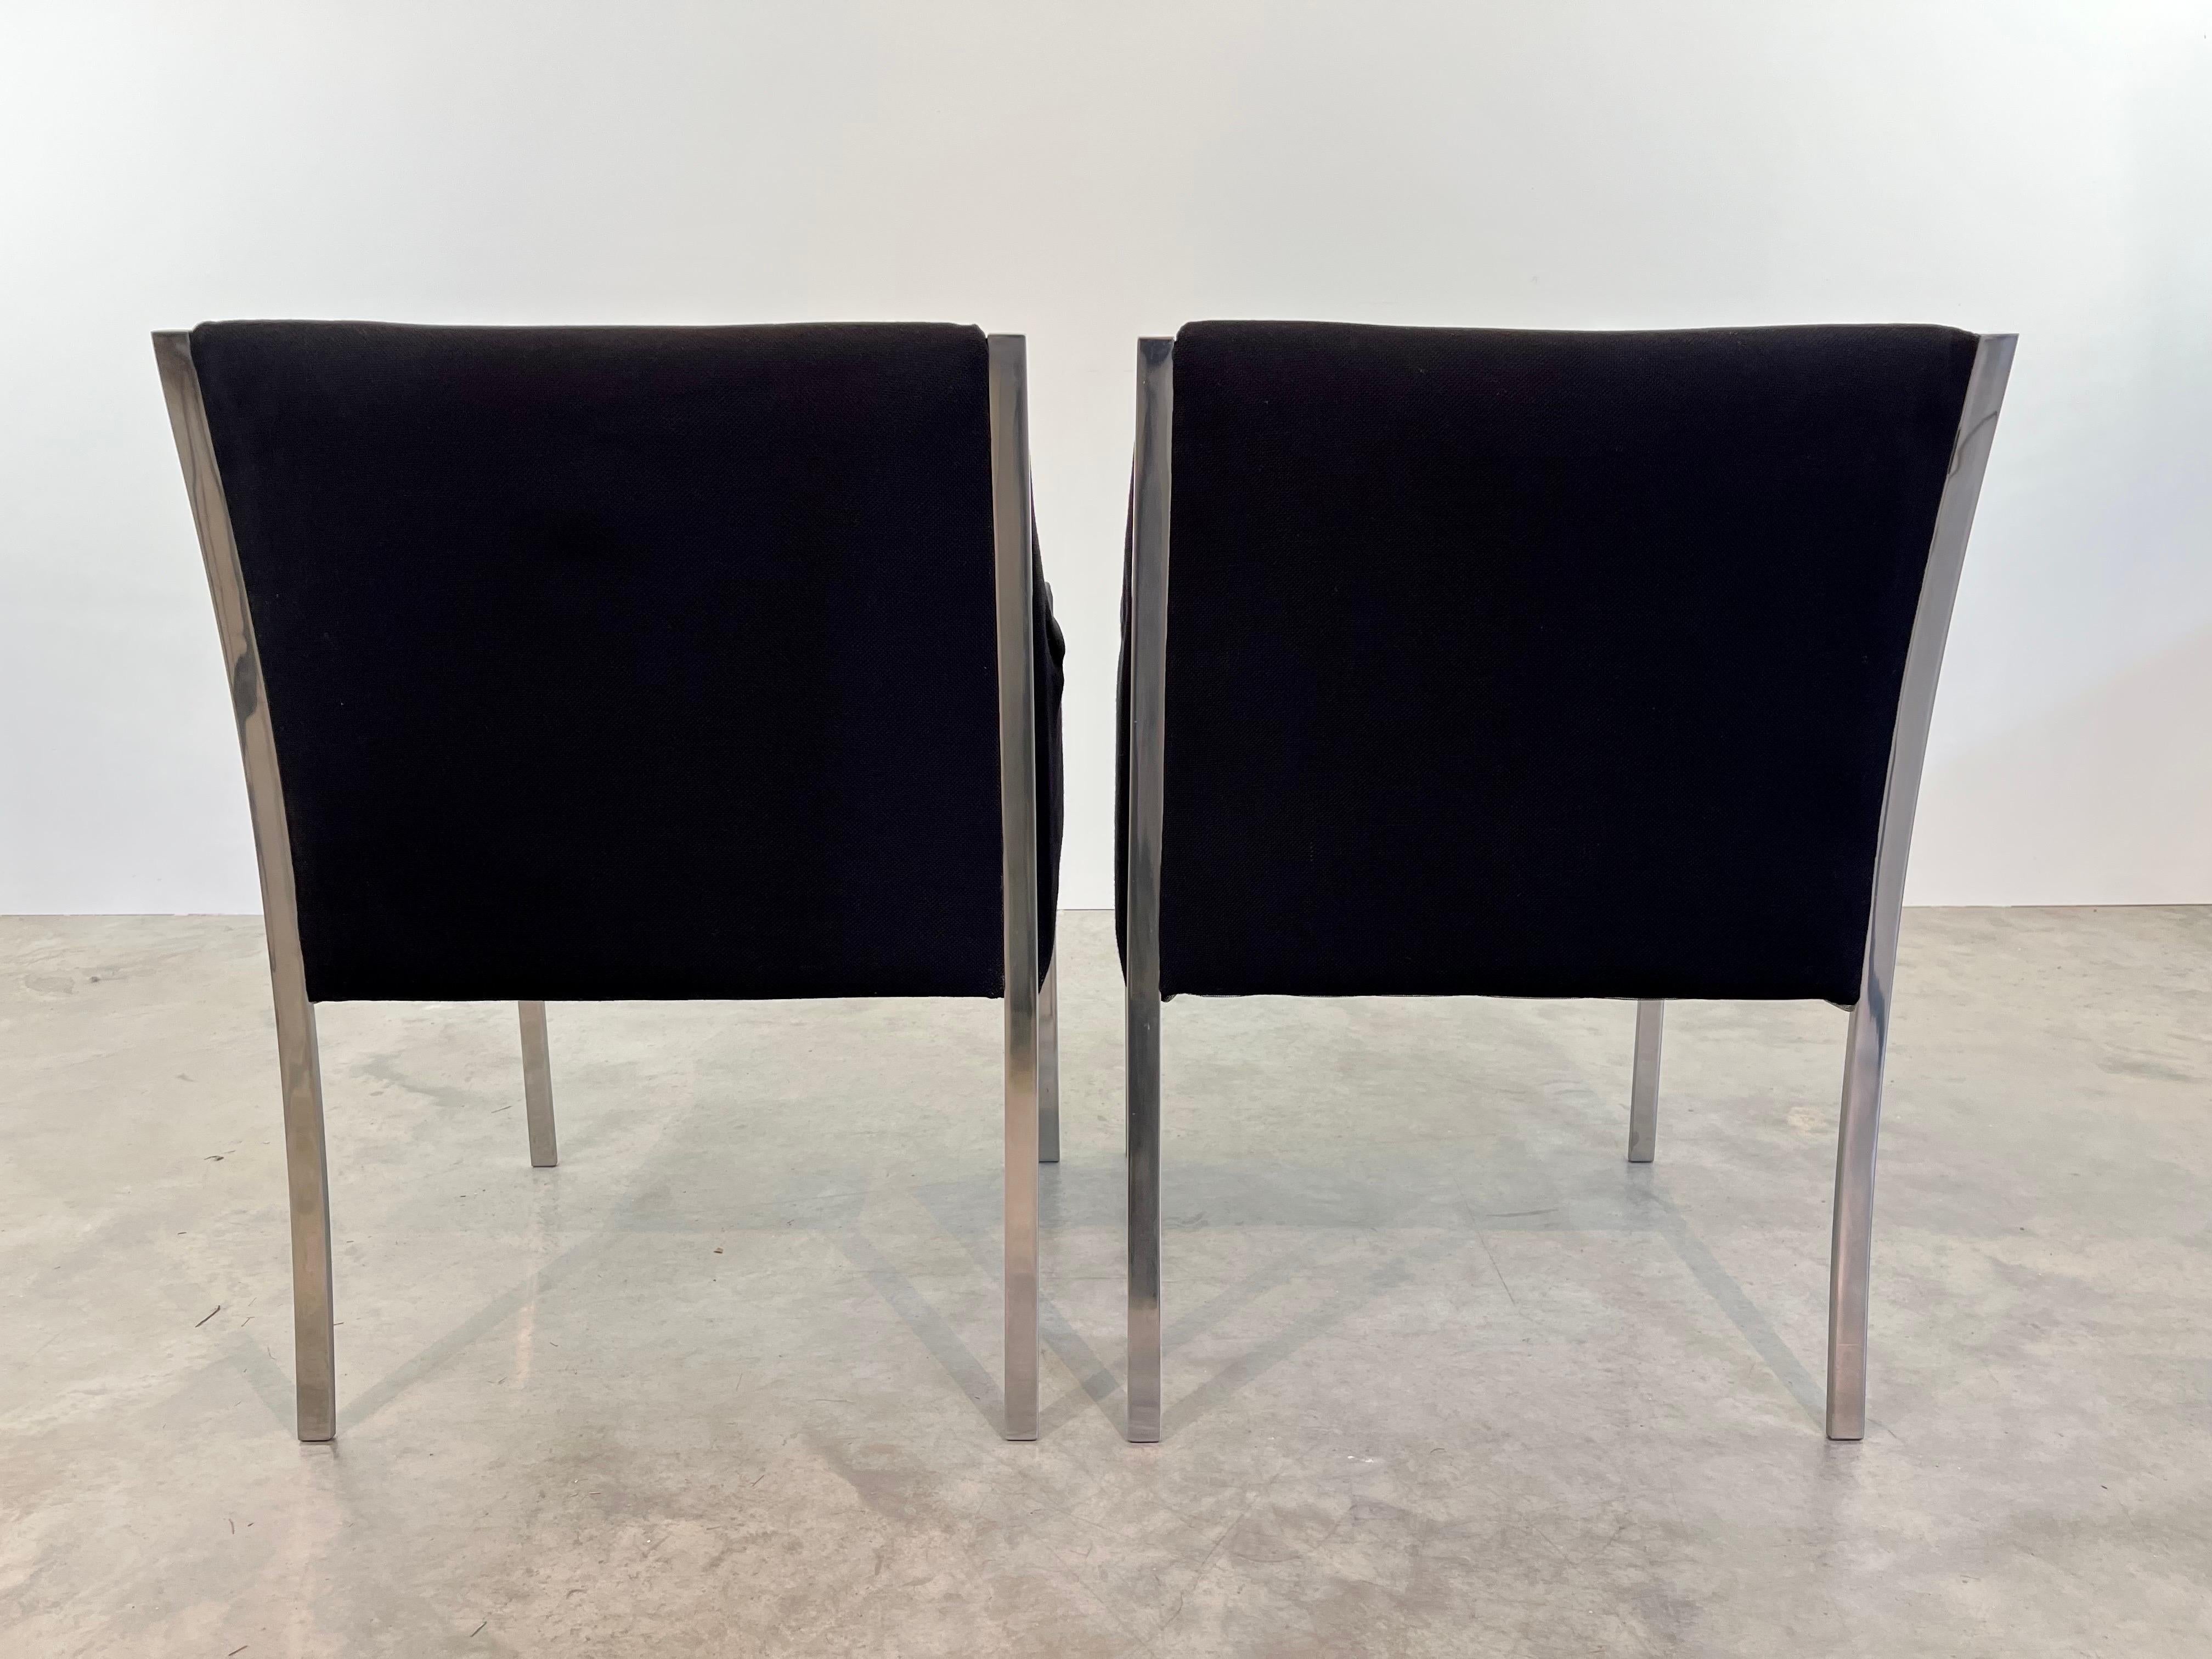 20th Century Scarce Pair of Jens Risom Sculptural Chromed Steel Lounge Chairs For Sale